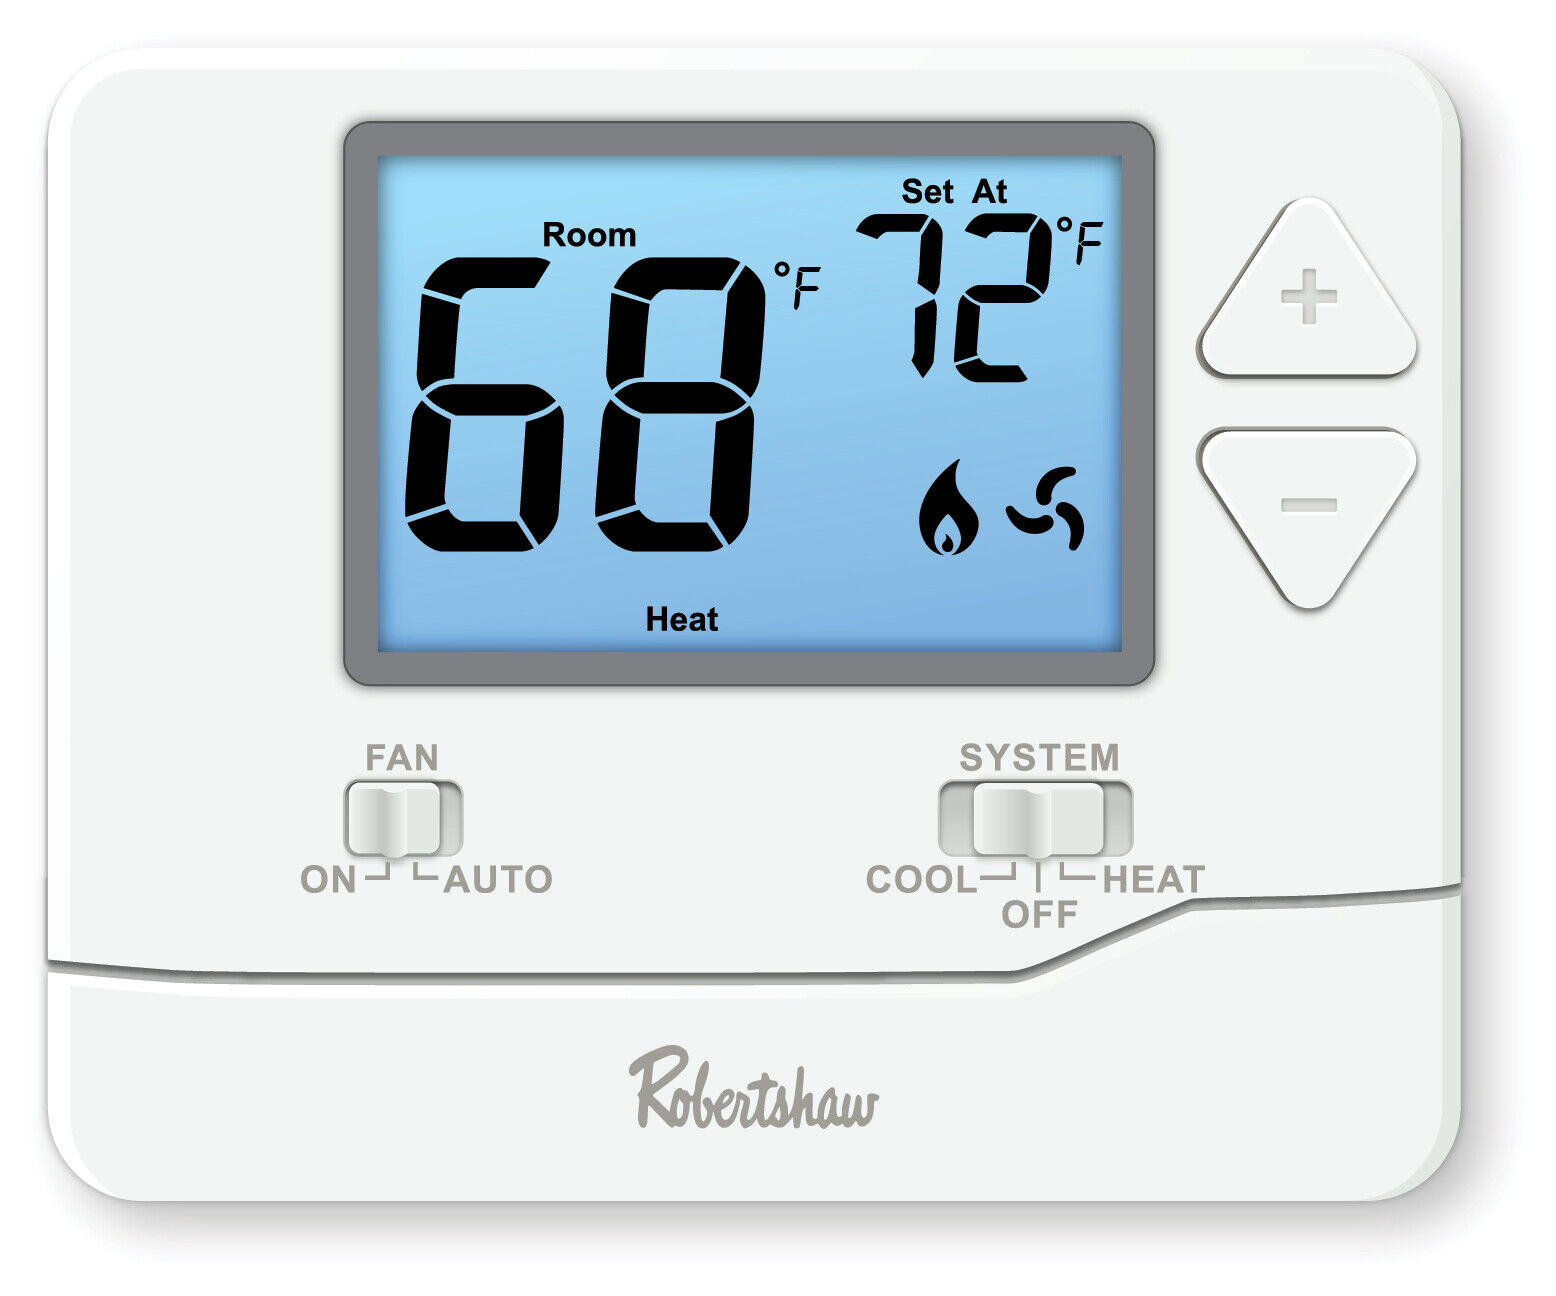 Robertshaw RS8110 Digital Non-Programmable Thermostat, Single Stage - 1 H / 1 C